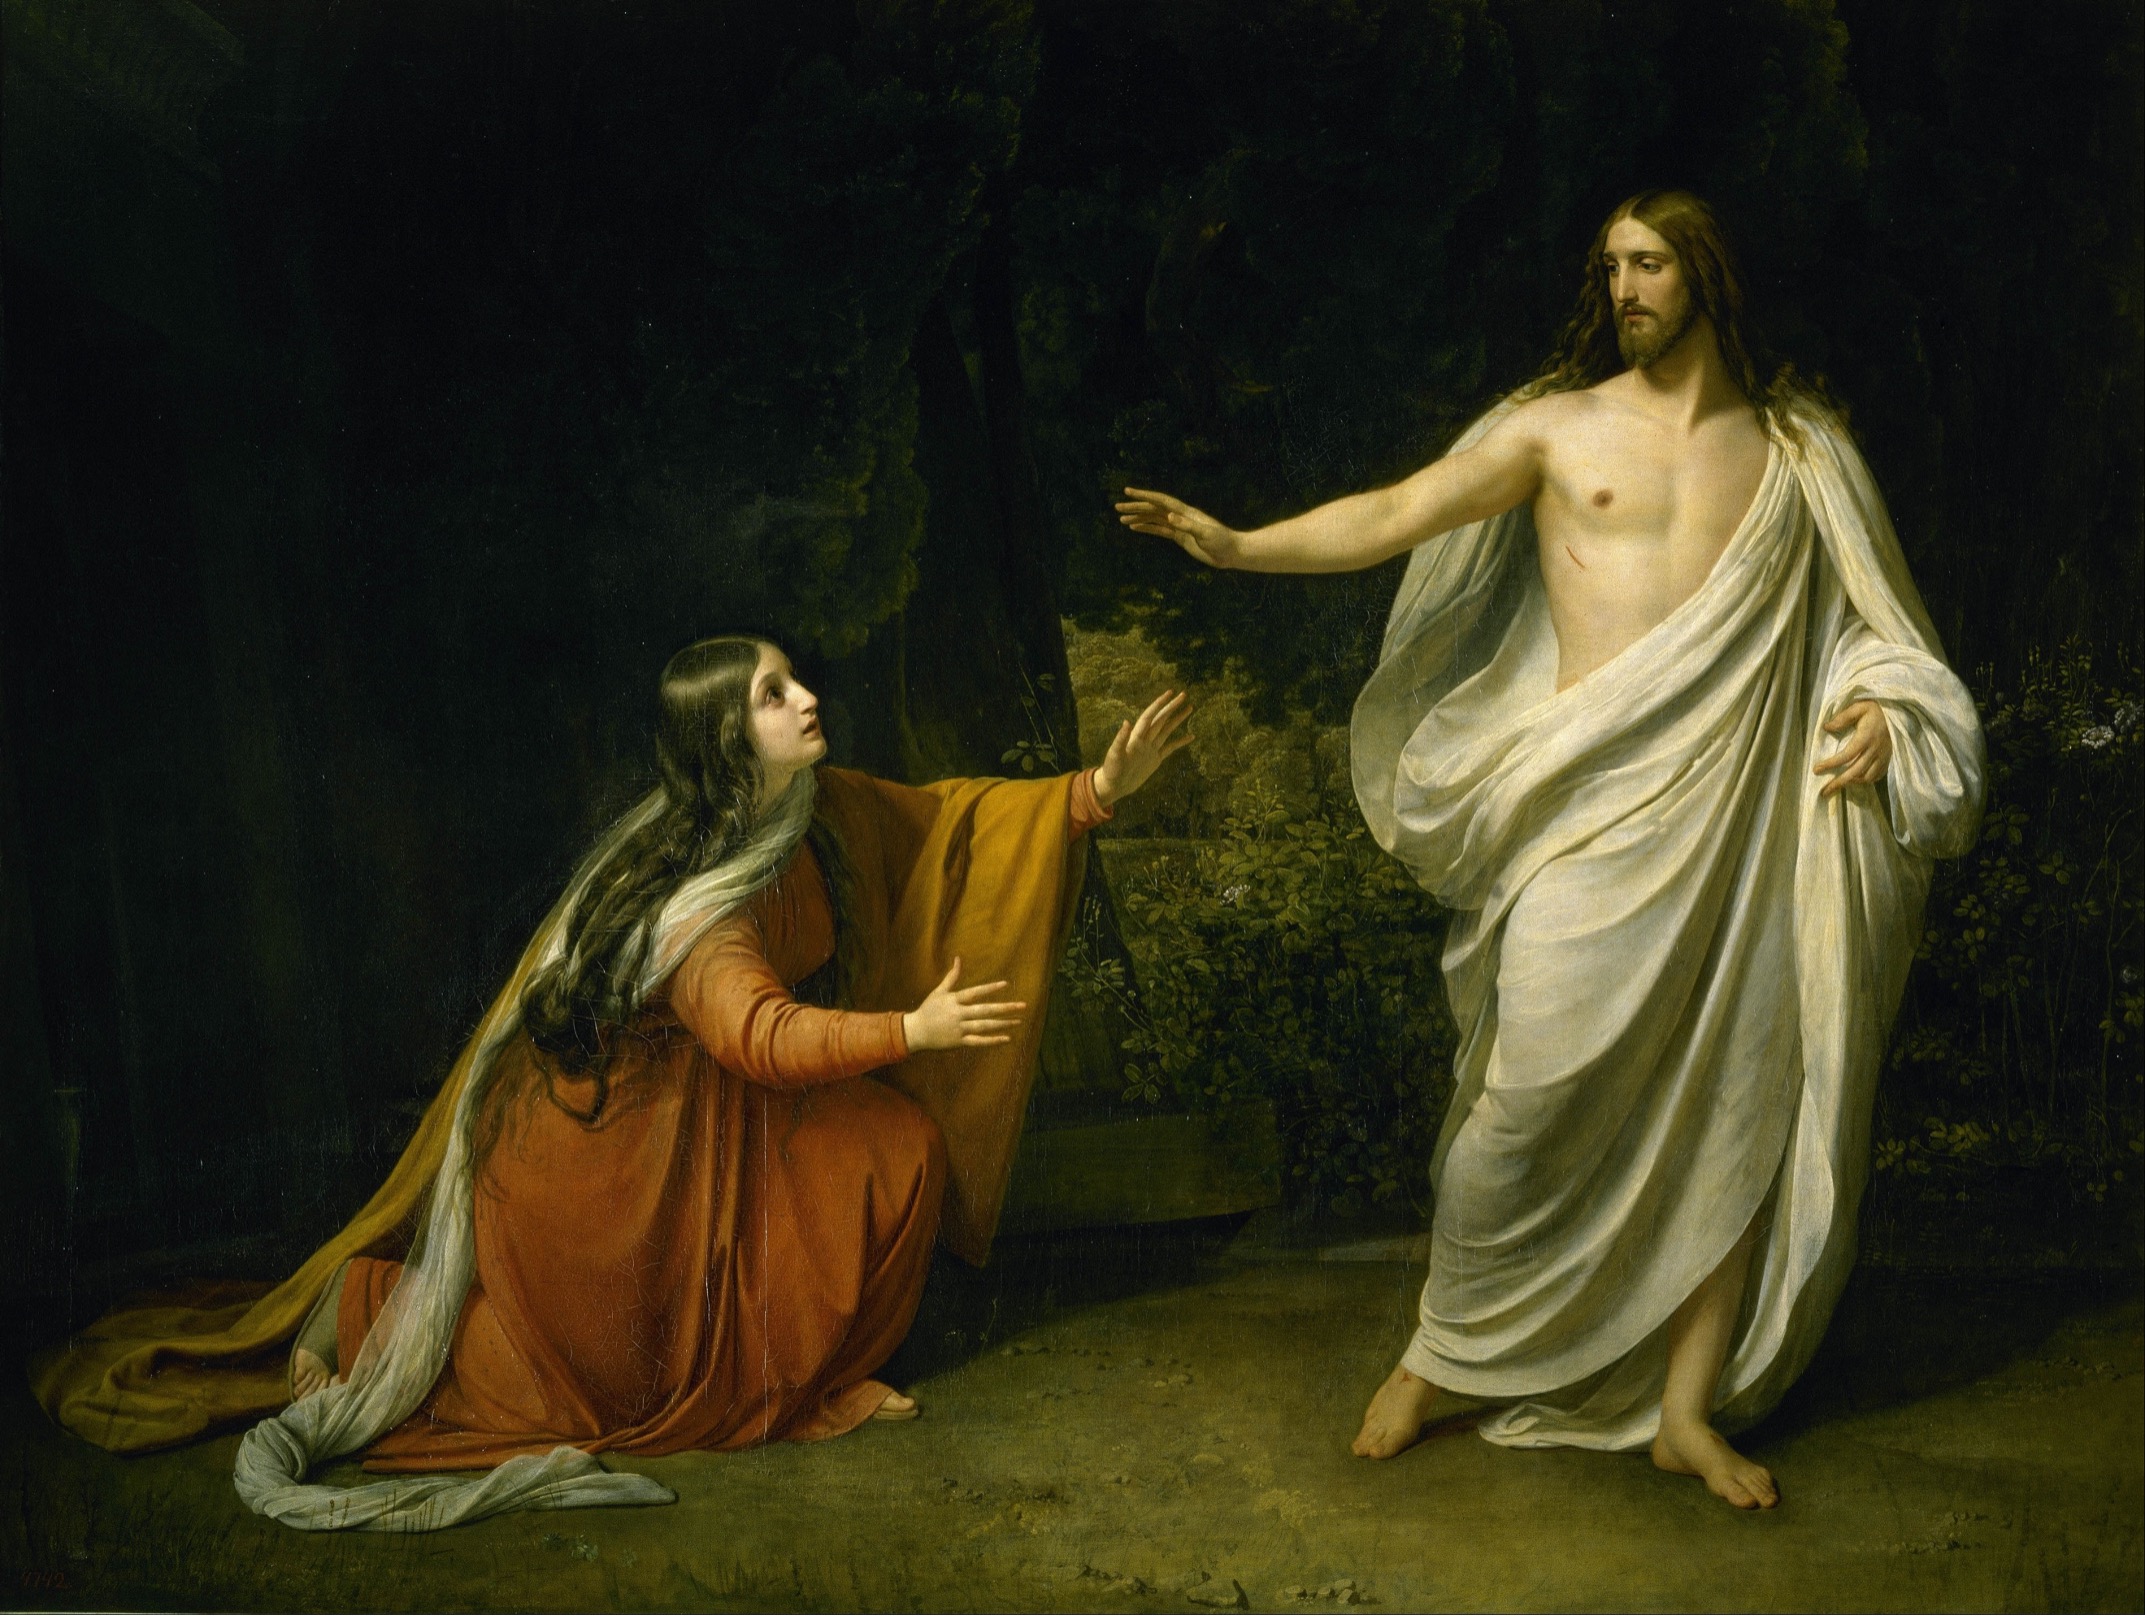 Neoclassical painting showing the figures of Mary Magdalene and Jesus.